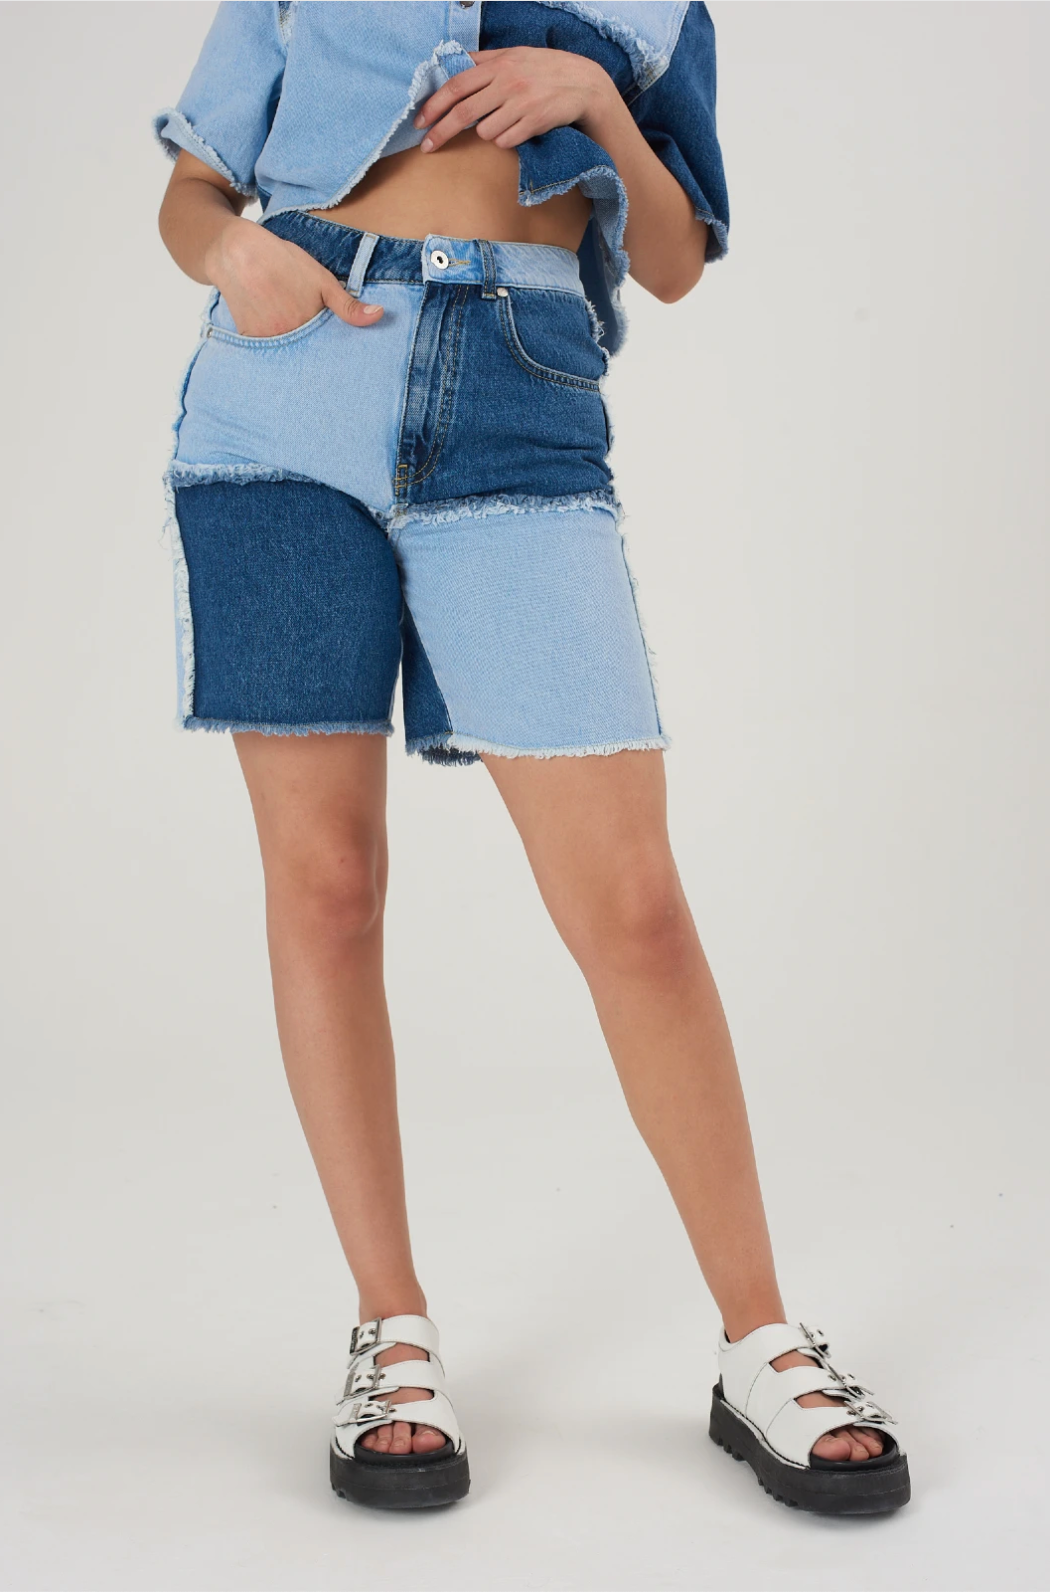 FIELD DENIM SHORTS - EXCLUSIVE Denim from THE RAGGED PRIEST - Just $48.95! SHOP NOW AT IAMINHATELOVE BOTH IN STORE FOR CYPRUS AND ONLINE WORLDWIDE